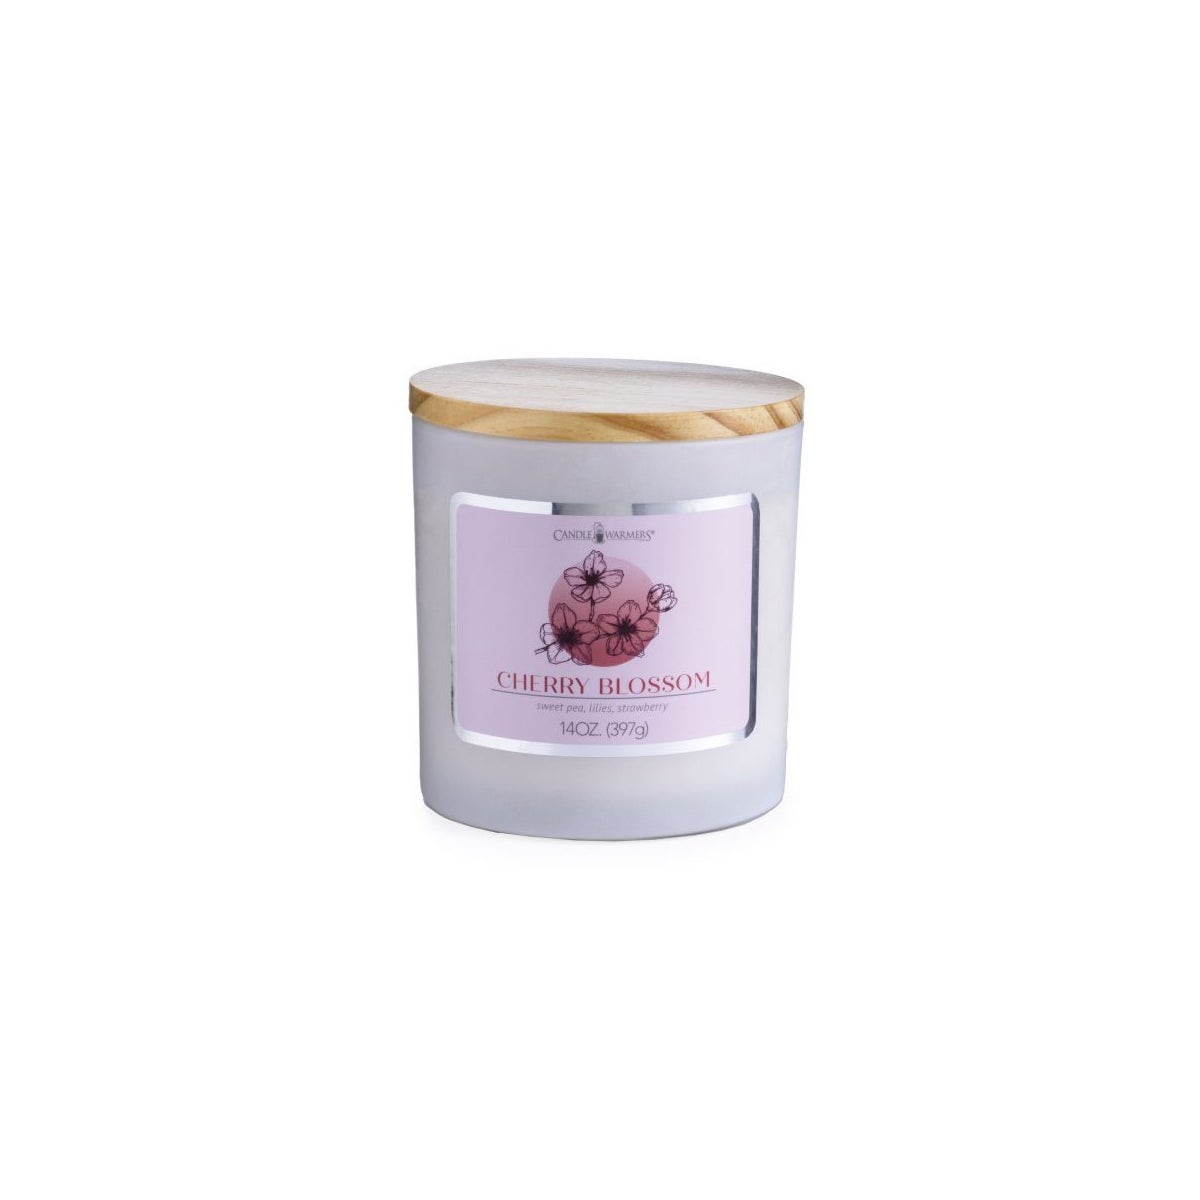 Limited Edition Spring Candle 14 oz - Cherry Blossom